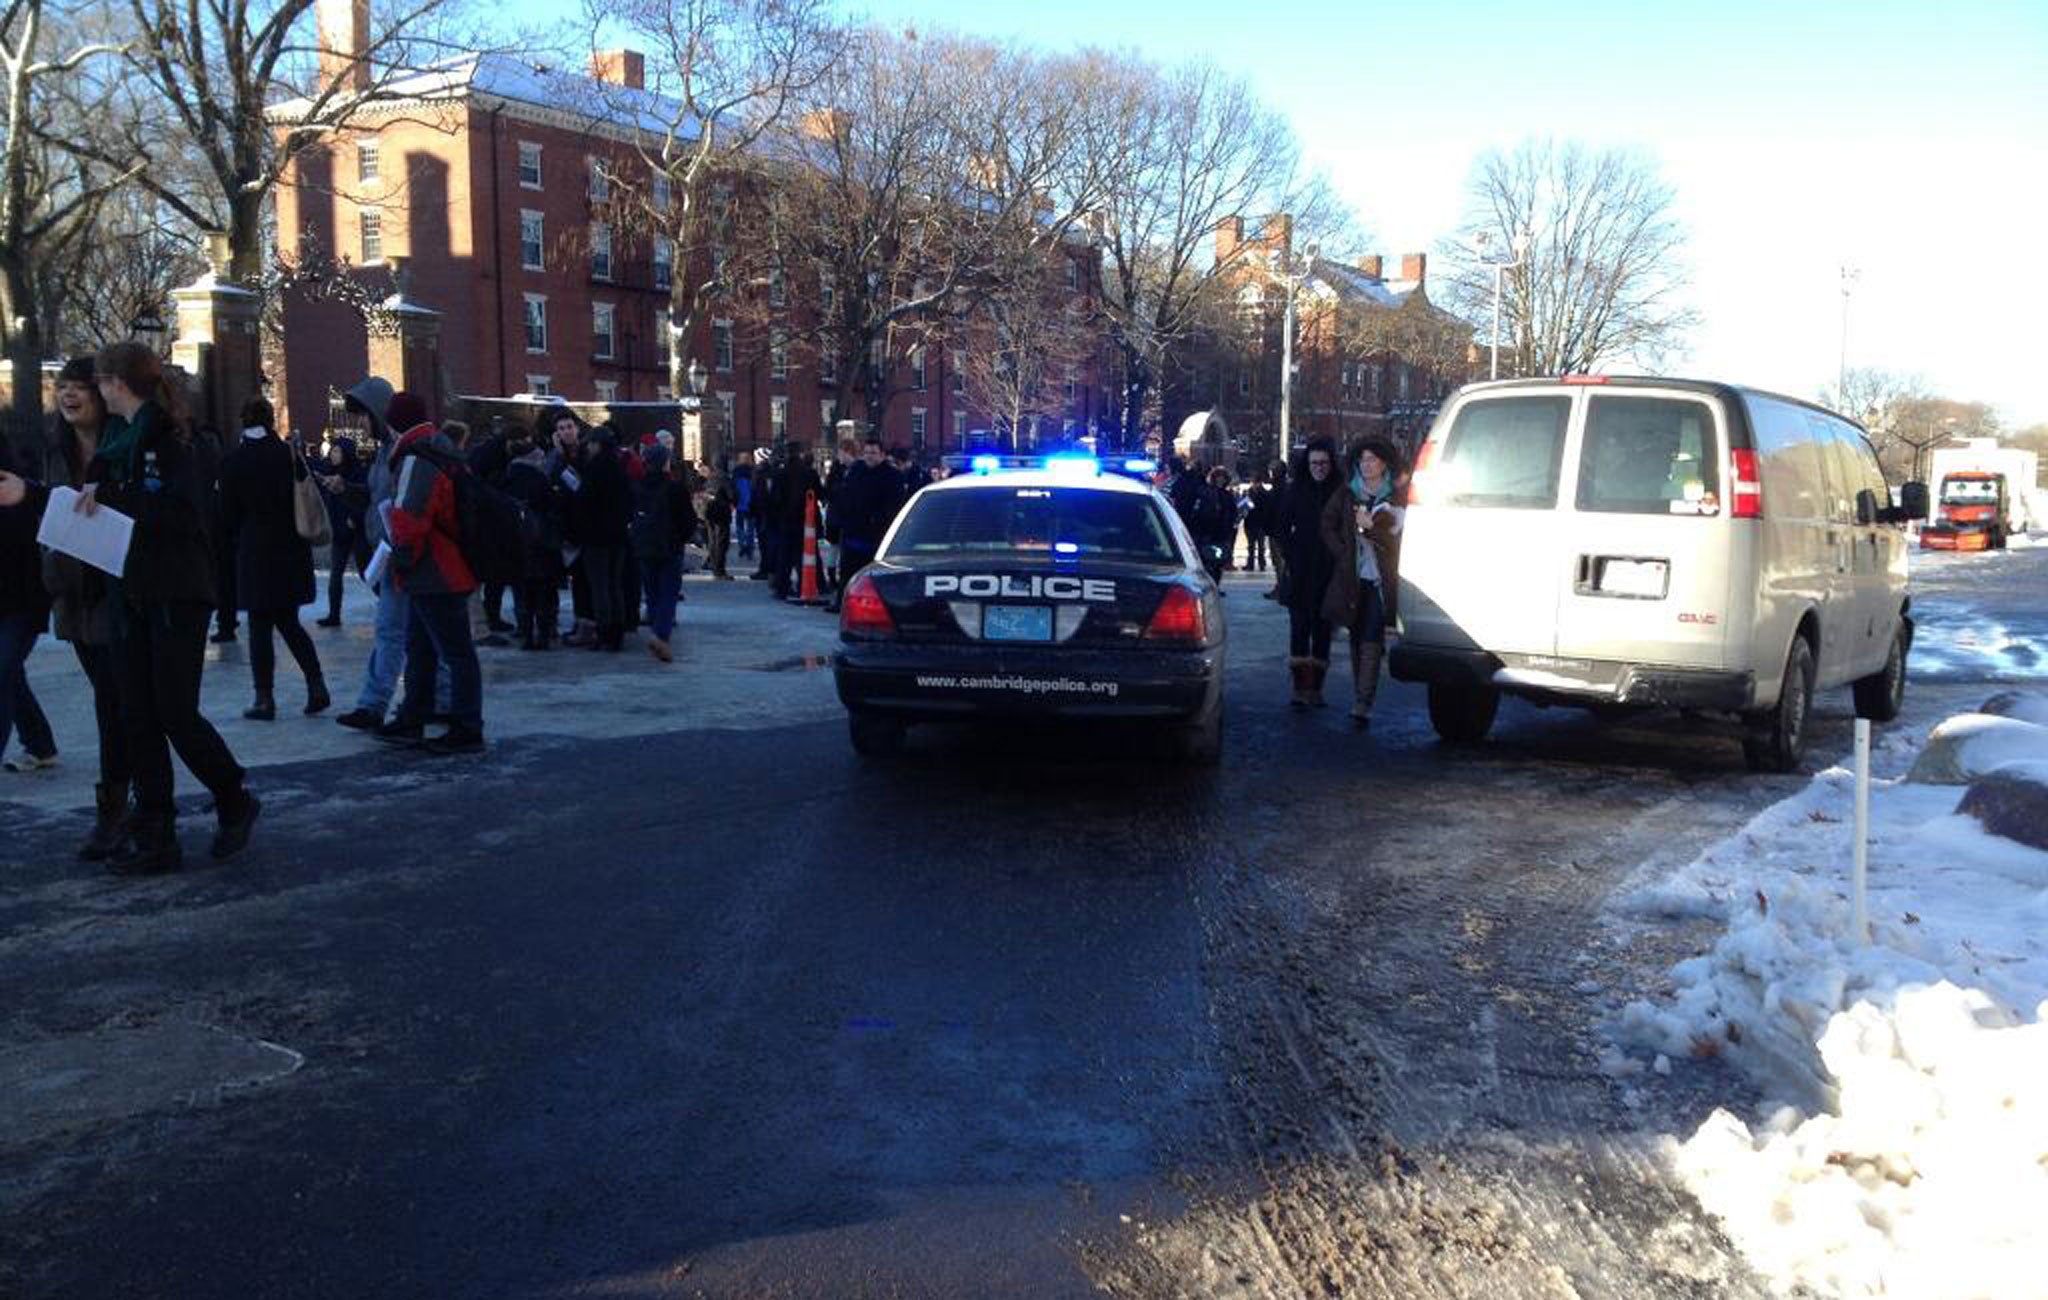 Students and police outside Harvard University's Science Center building, after unconfirmed reports of a bomb threat inside